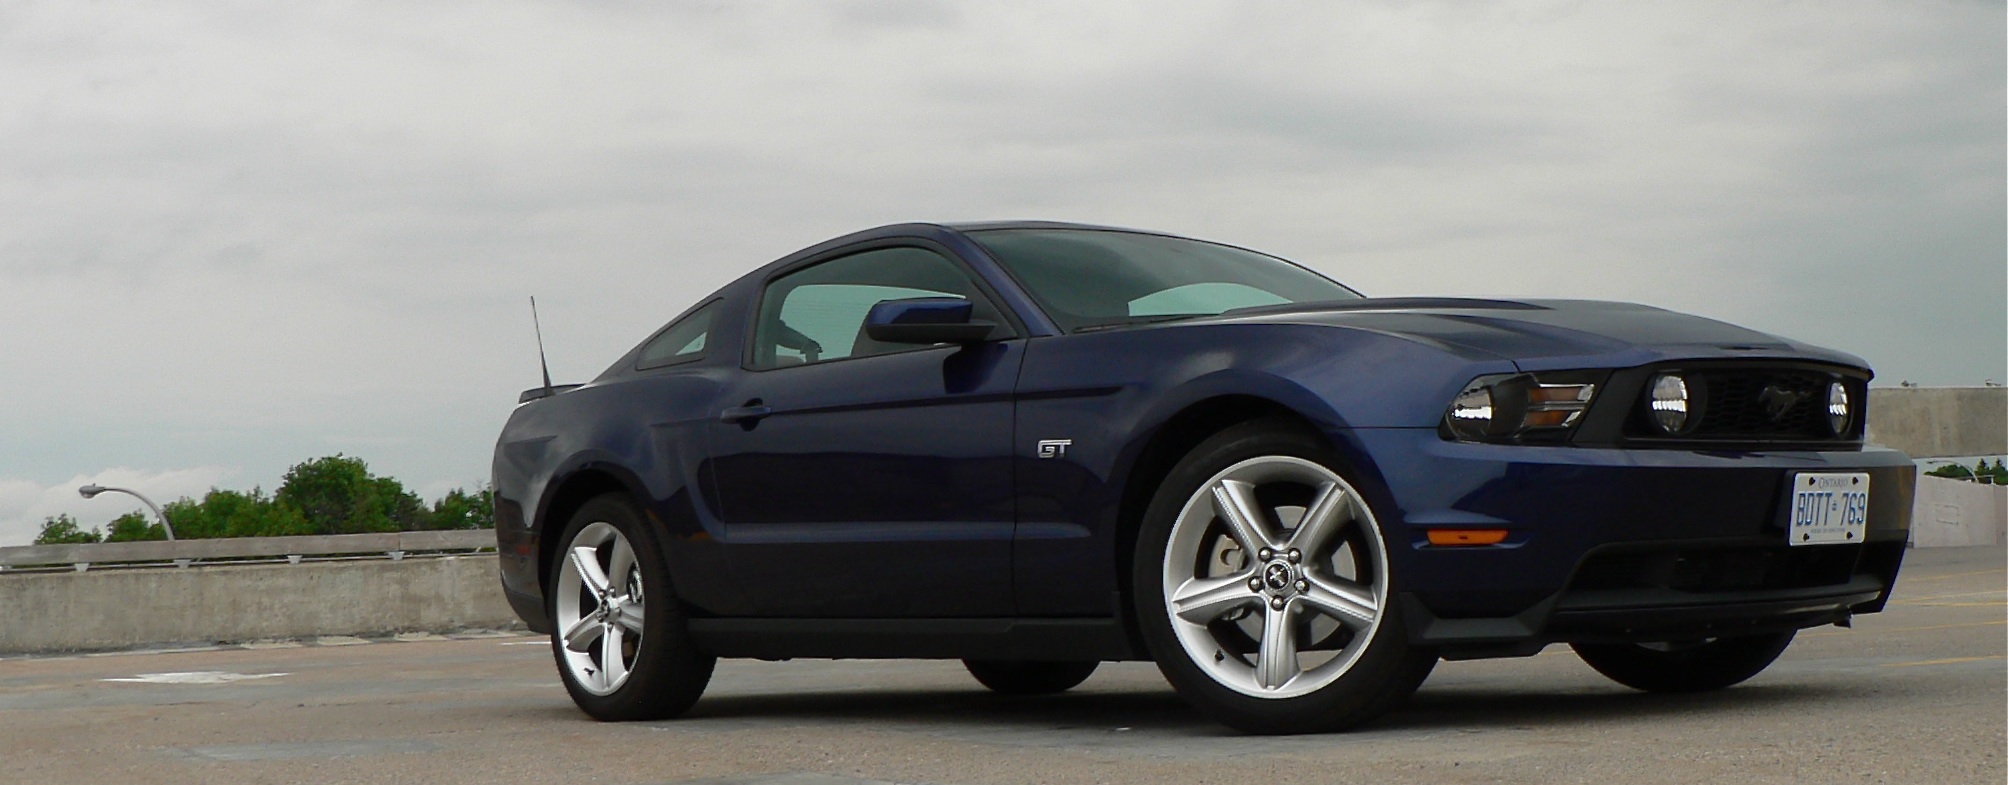 How much horsepower does a 2003 ford mustang gt have #2